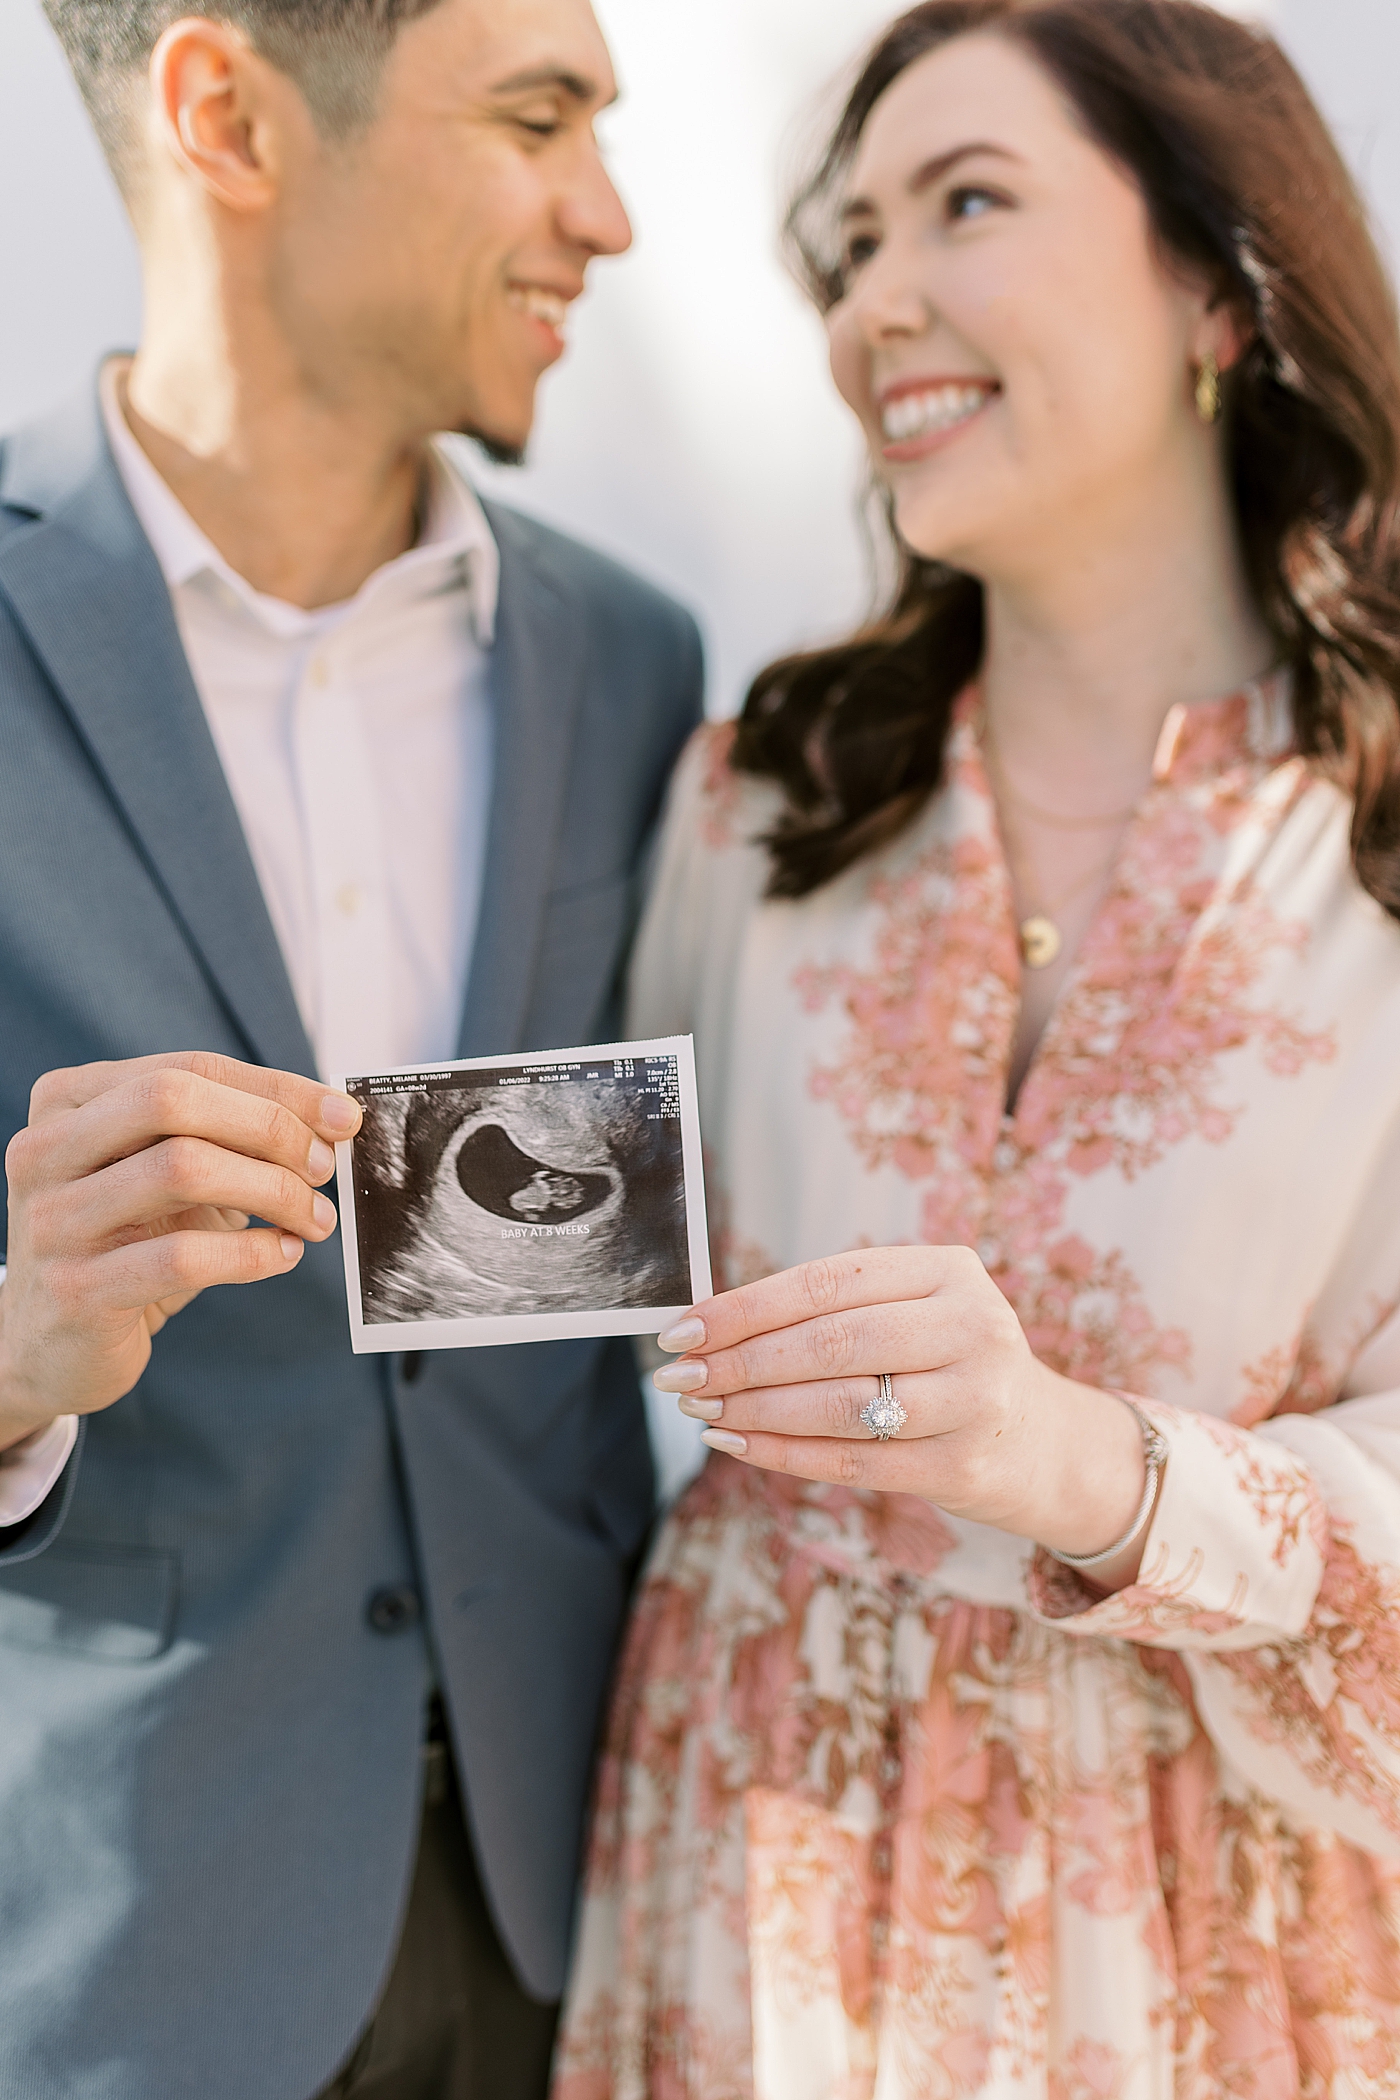 Mom and dad to be holding their sonogram photo and smiling | Photo by Caitlyn Motycka Photography